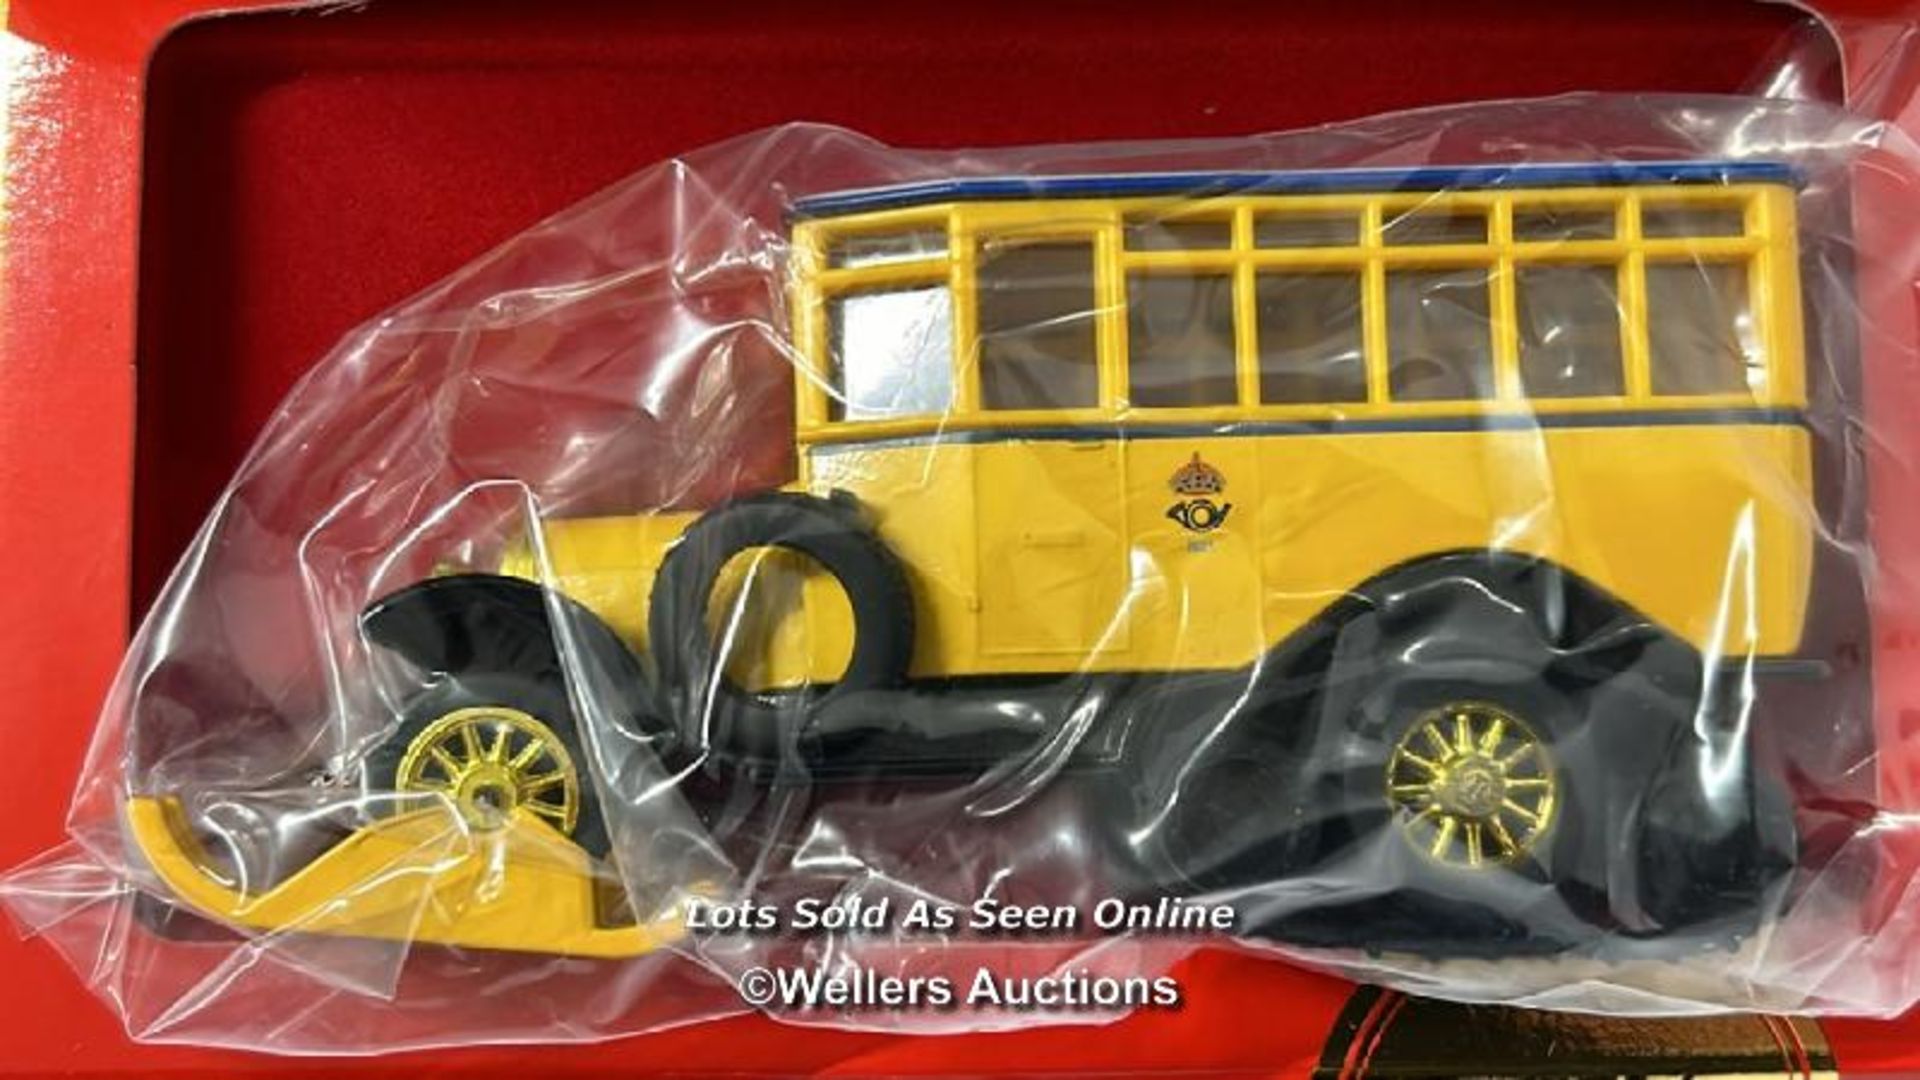 Matchbox Models of Yesteryear 1923 Scania-Vabis Post Bus Y16, rare yellow variant, limited edition - Image 2 of 5